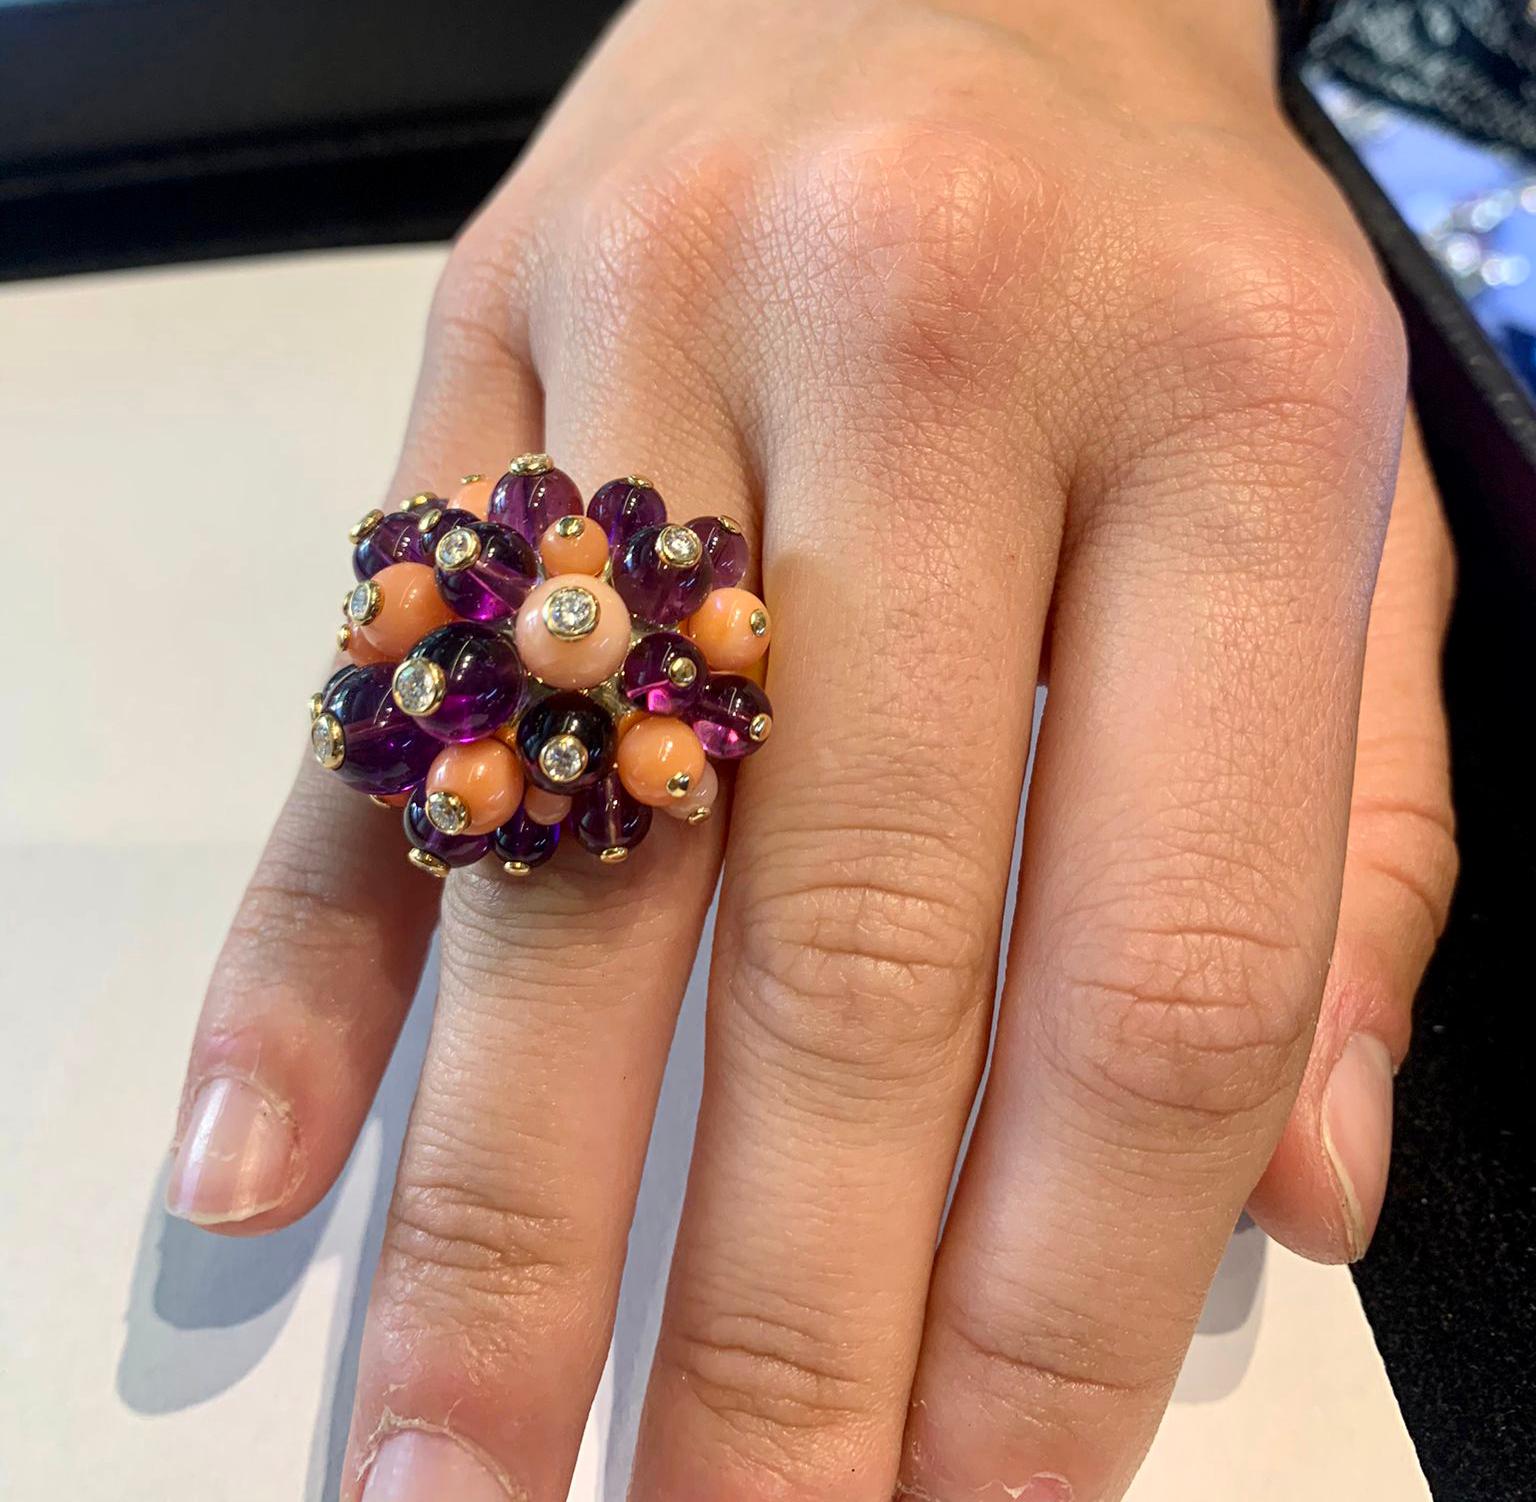 Art Deco Cartier ‘Delice de Goa’ Ring with Amethyst, Diamonds and Coral in 18k Gold